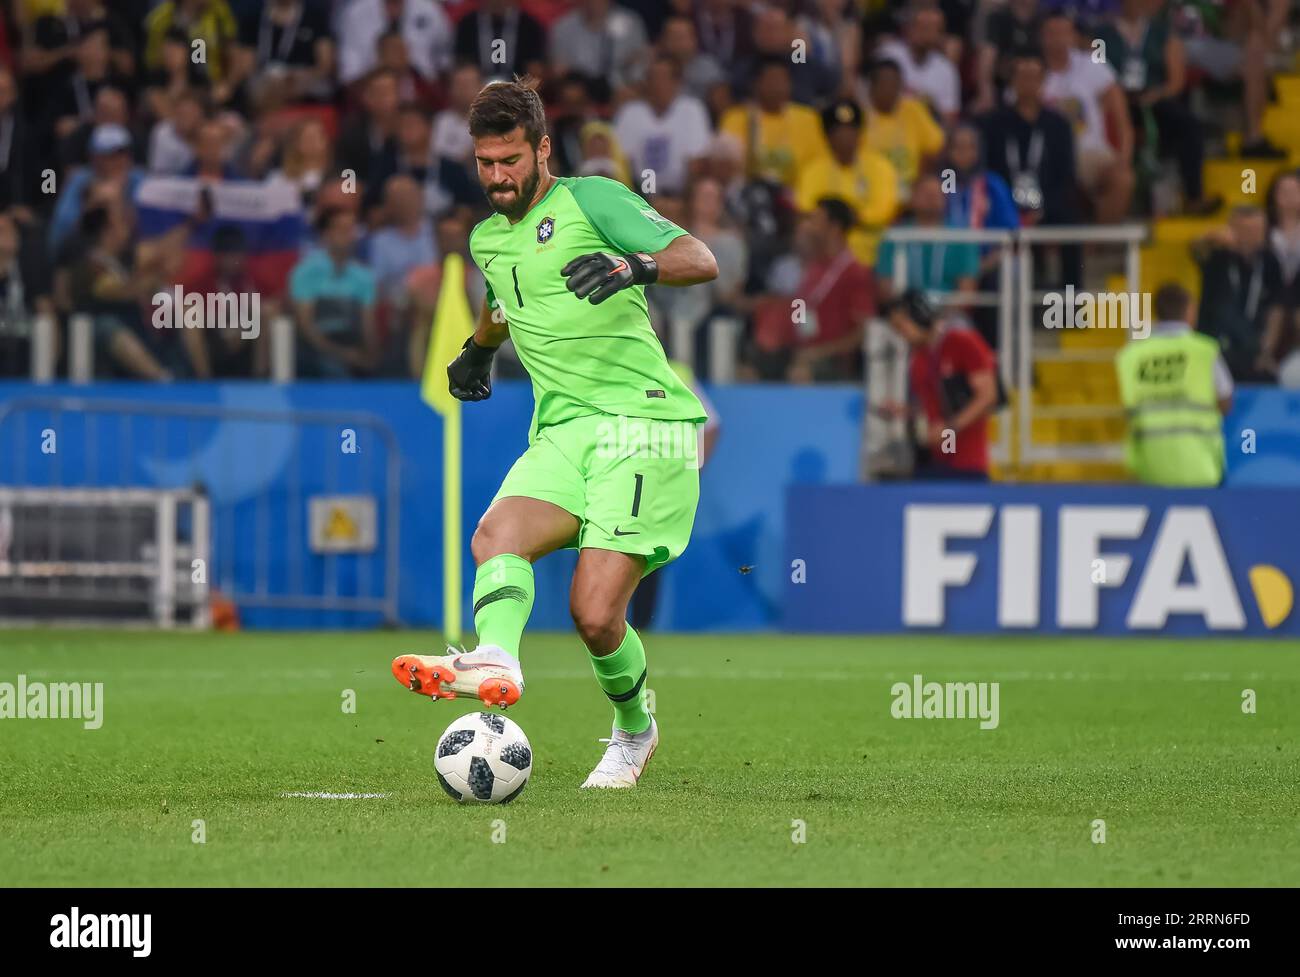 Moscow, Russia - June 27, 2018. Brazil national team goalkeeper Alisson during FIFA World Cup 2018 match Serbia vs Brazil (0-2) Stock Photo